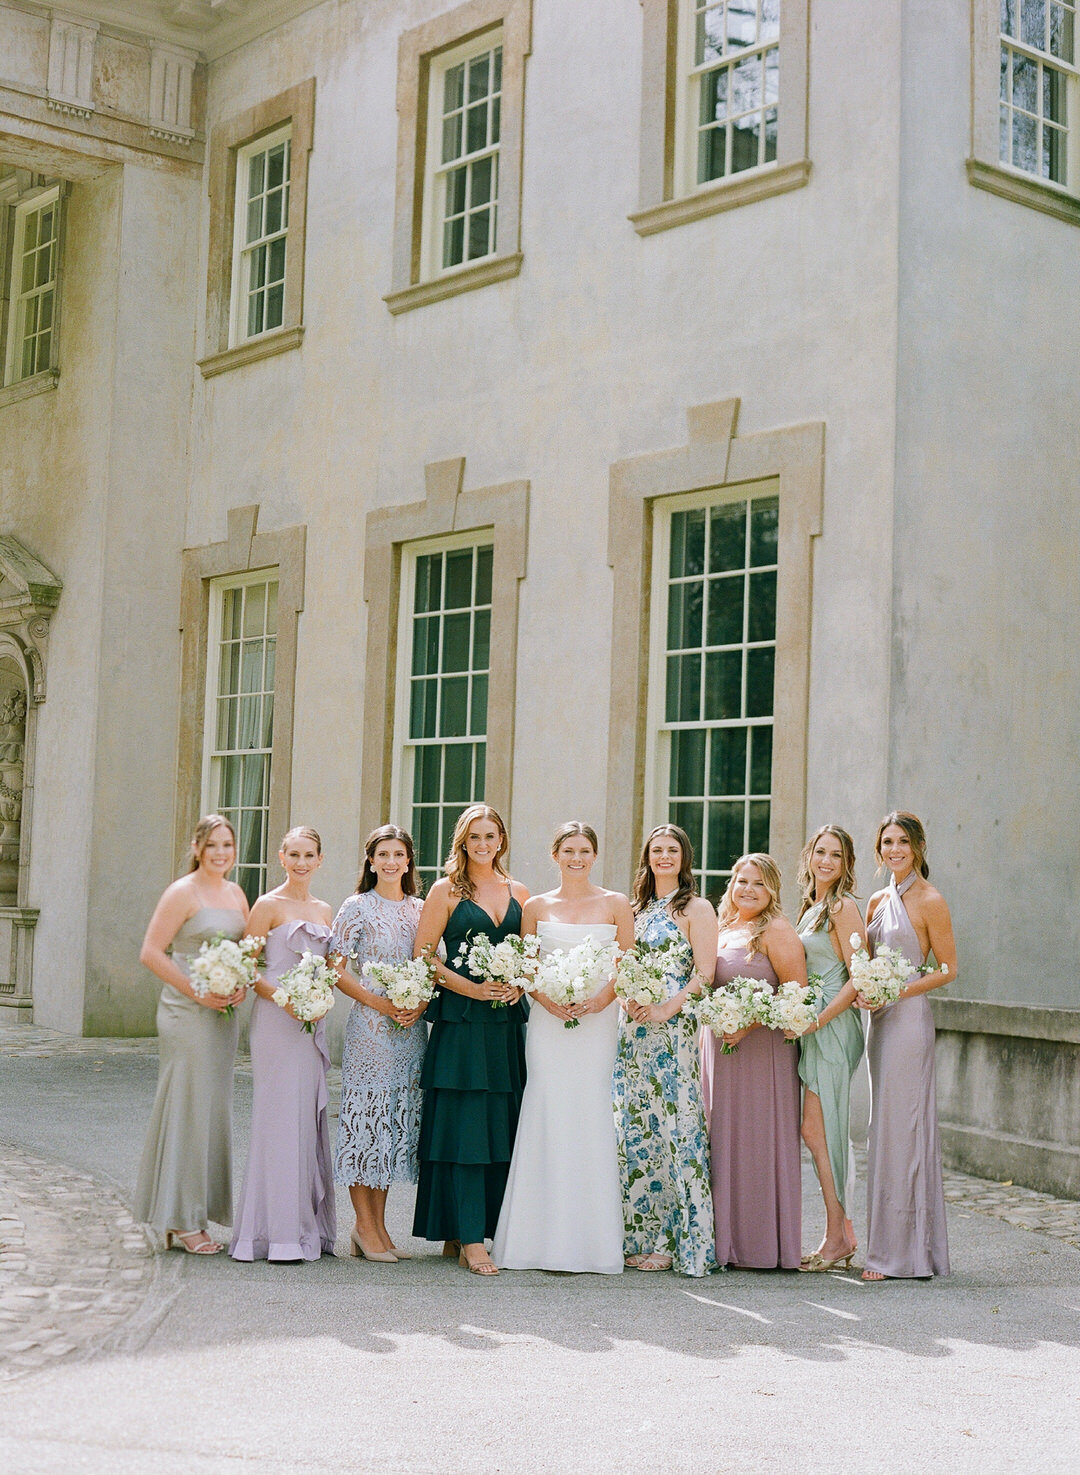 Bride with Bridesmaids in different pattern dresses at The Swan House